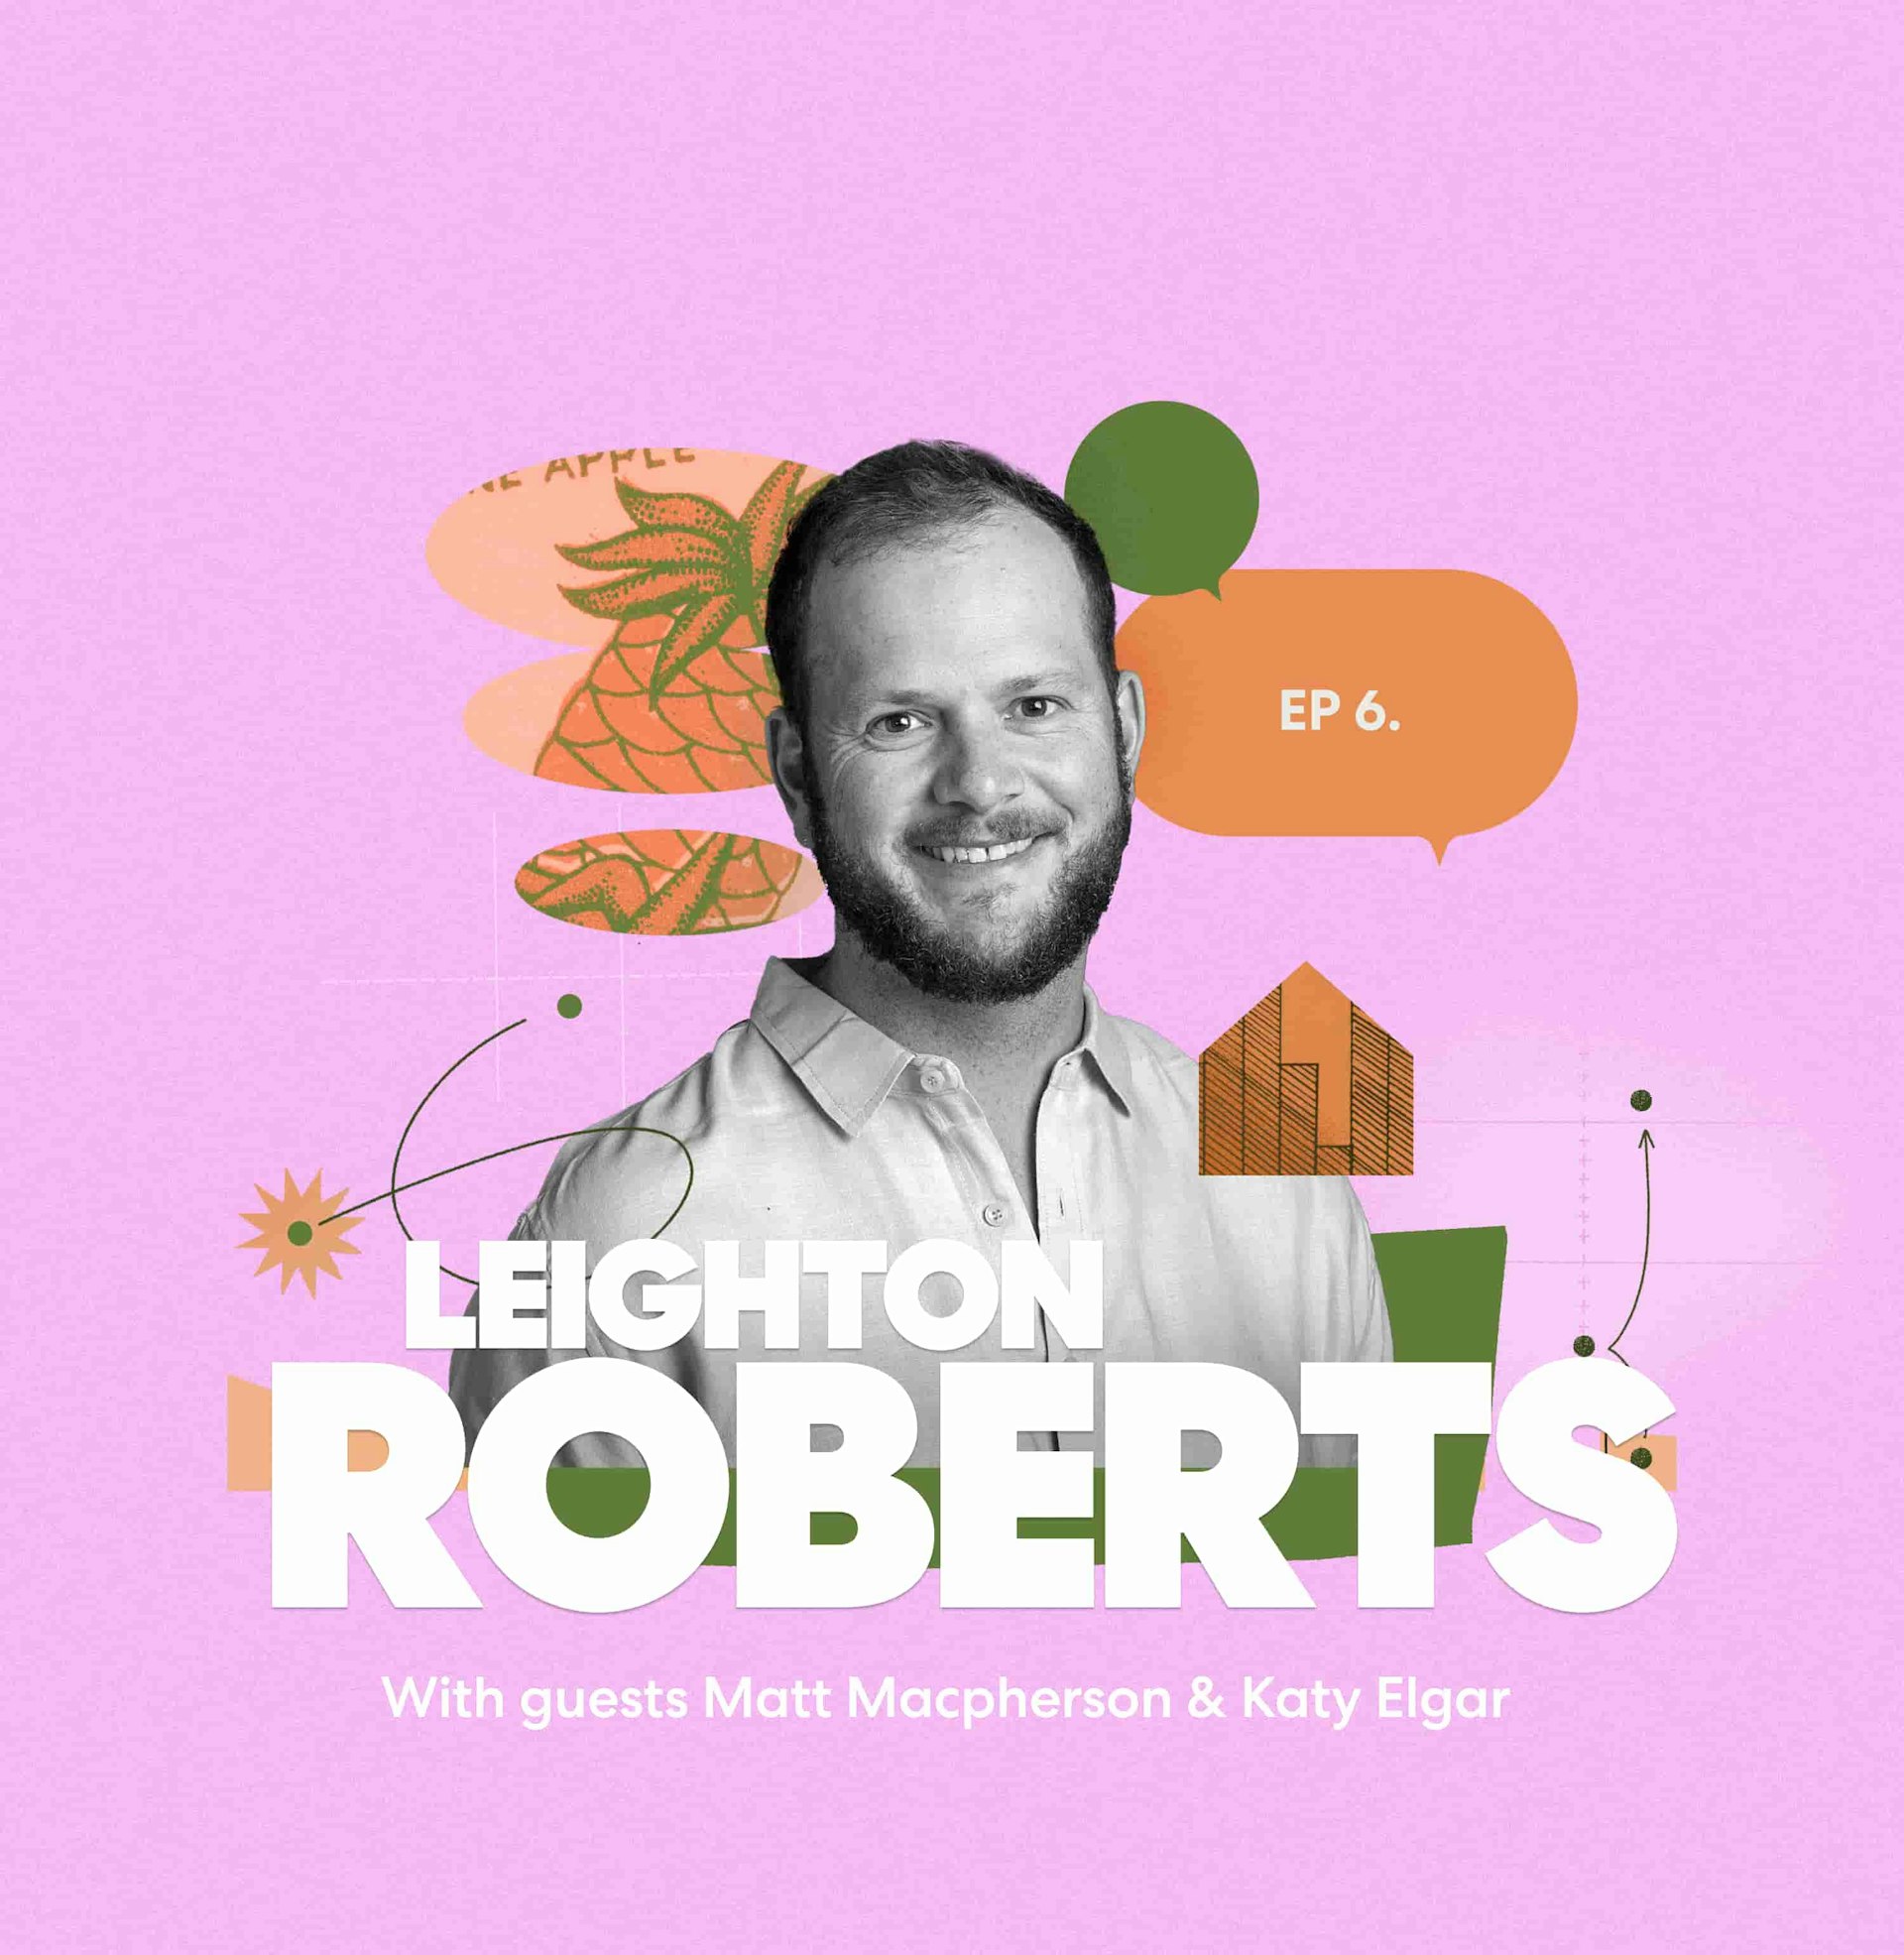 Album artwork for episode 6 of The Payoff podcast featuring Leighton Roberts.